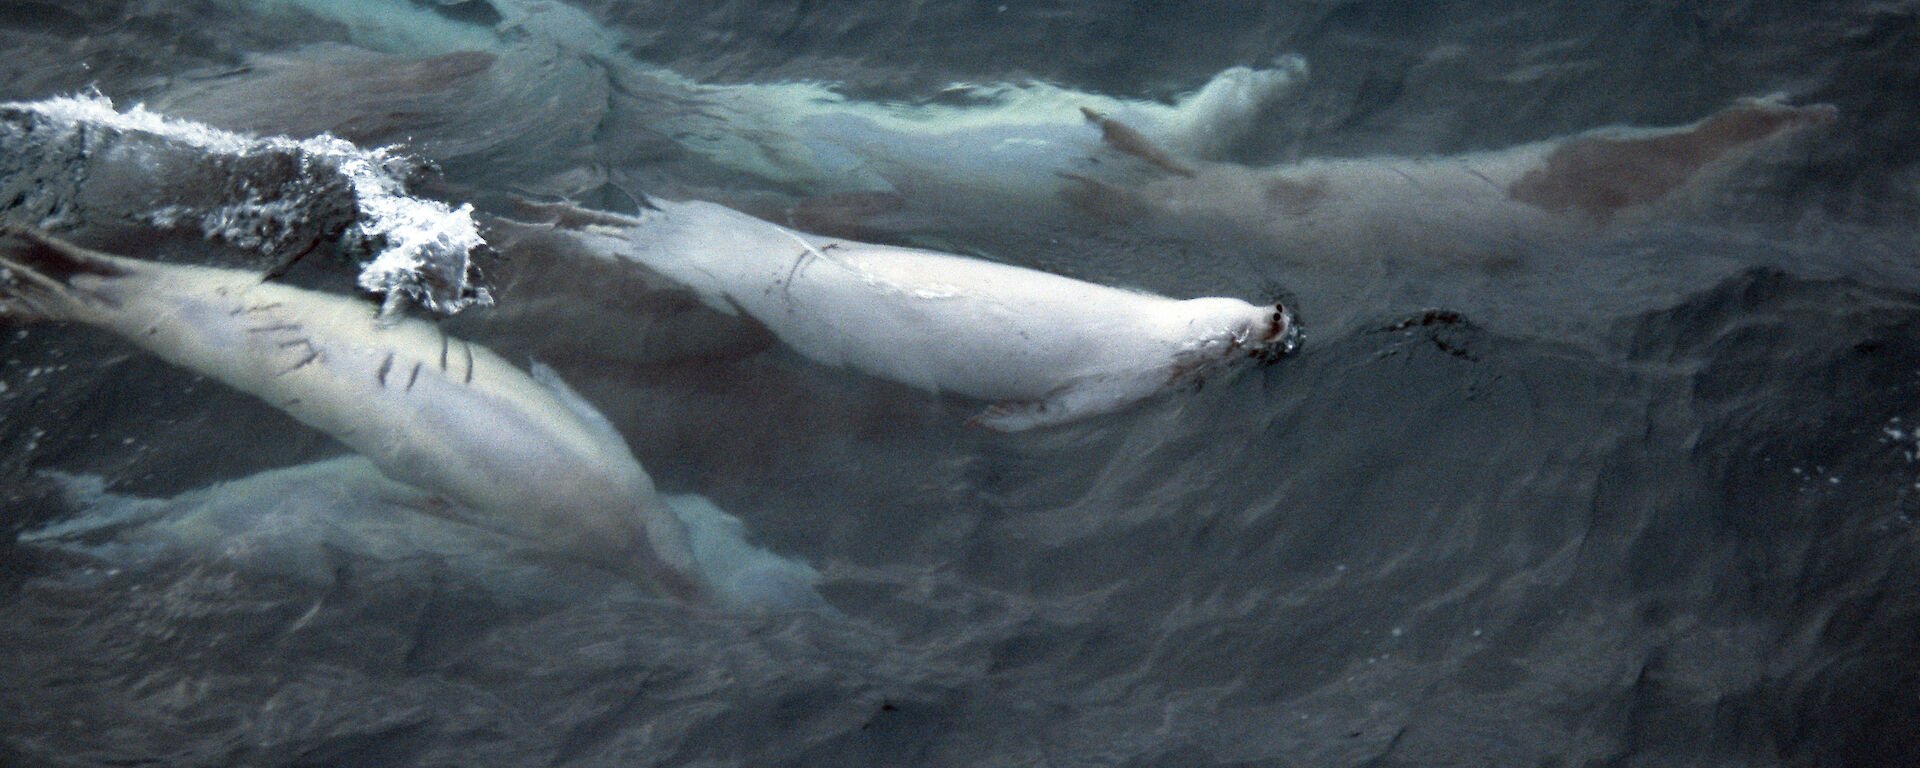 Several crabeater seals, swimming in a group in the ocean